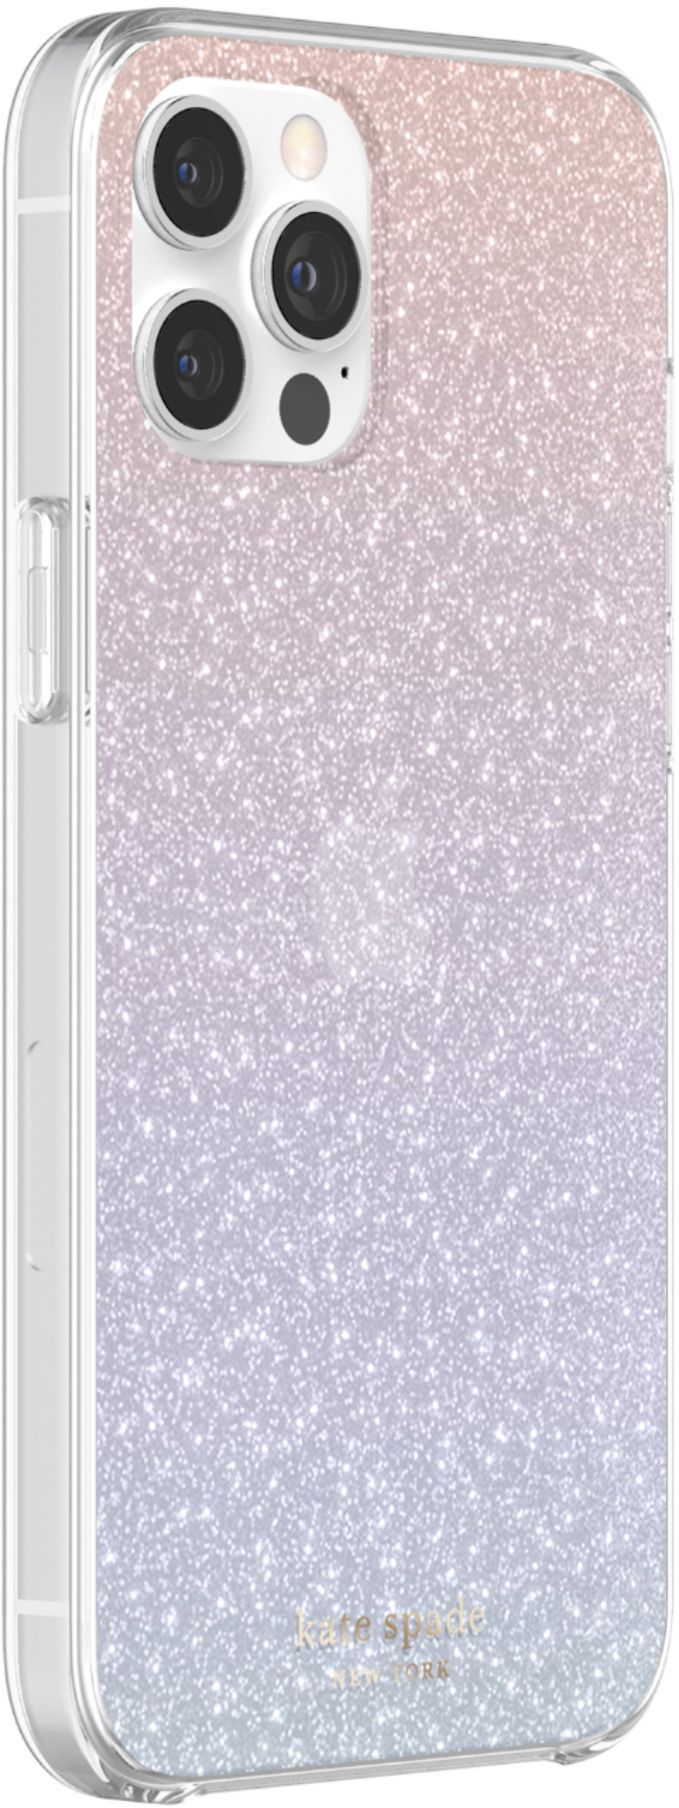 Best Buy: kate spade new york Protective Hard shell Case for 